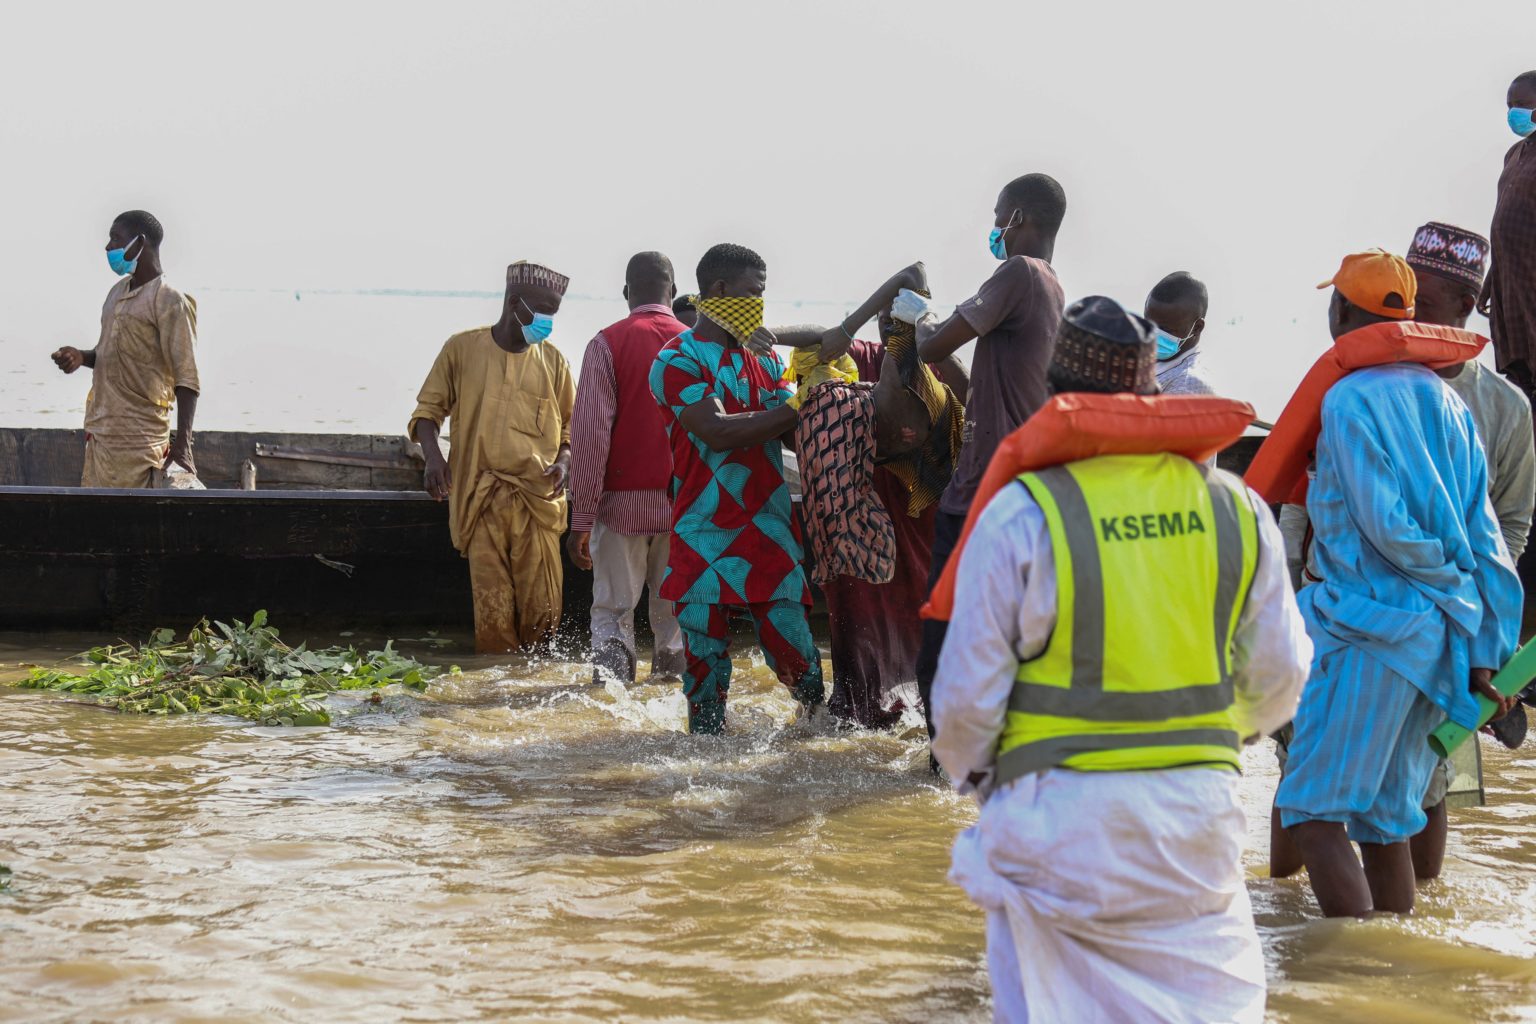 13 Wedding Guests Drown After Boat Capsizes In Nigeria Inquirer News 0172